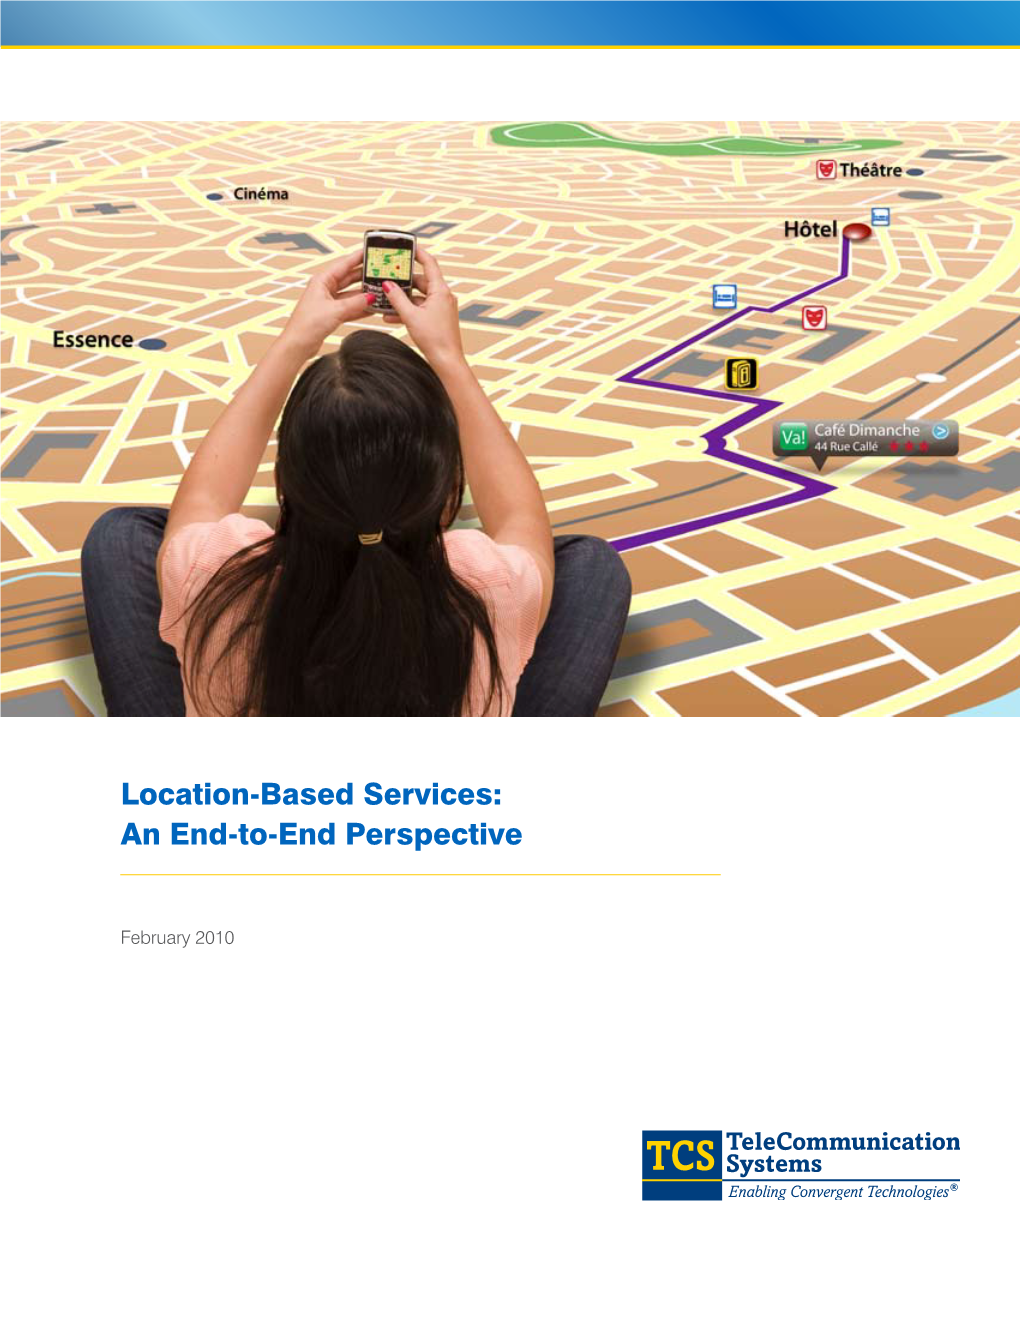 Location-Based Services: an End-To-End Perspective